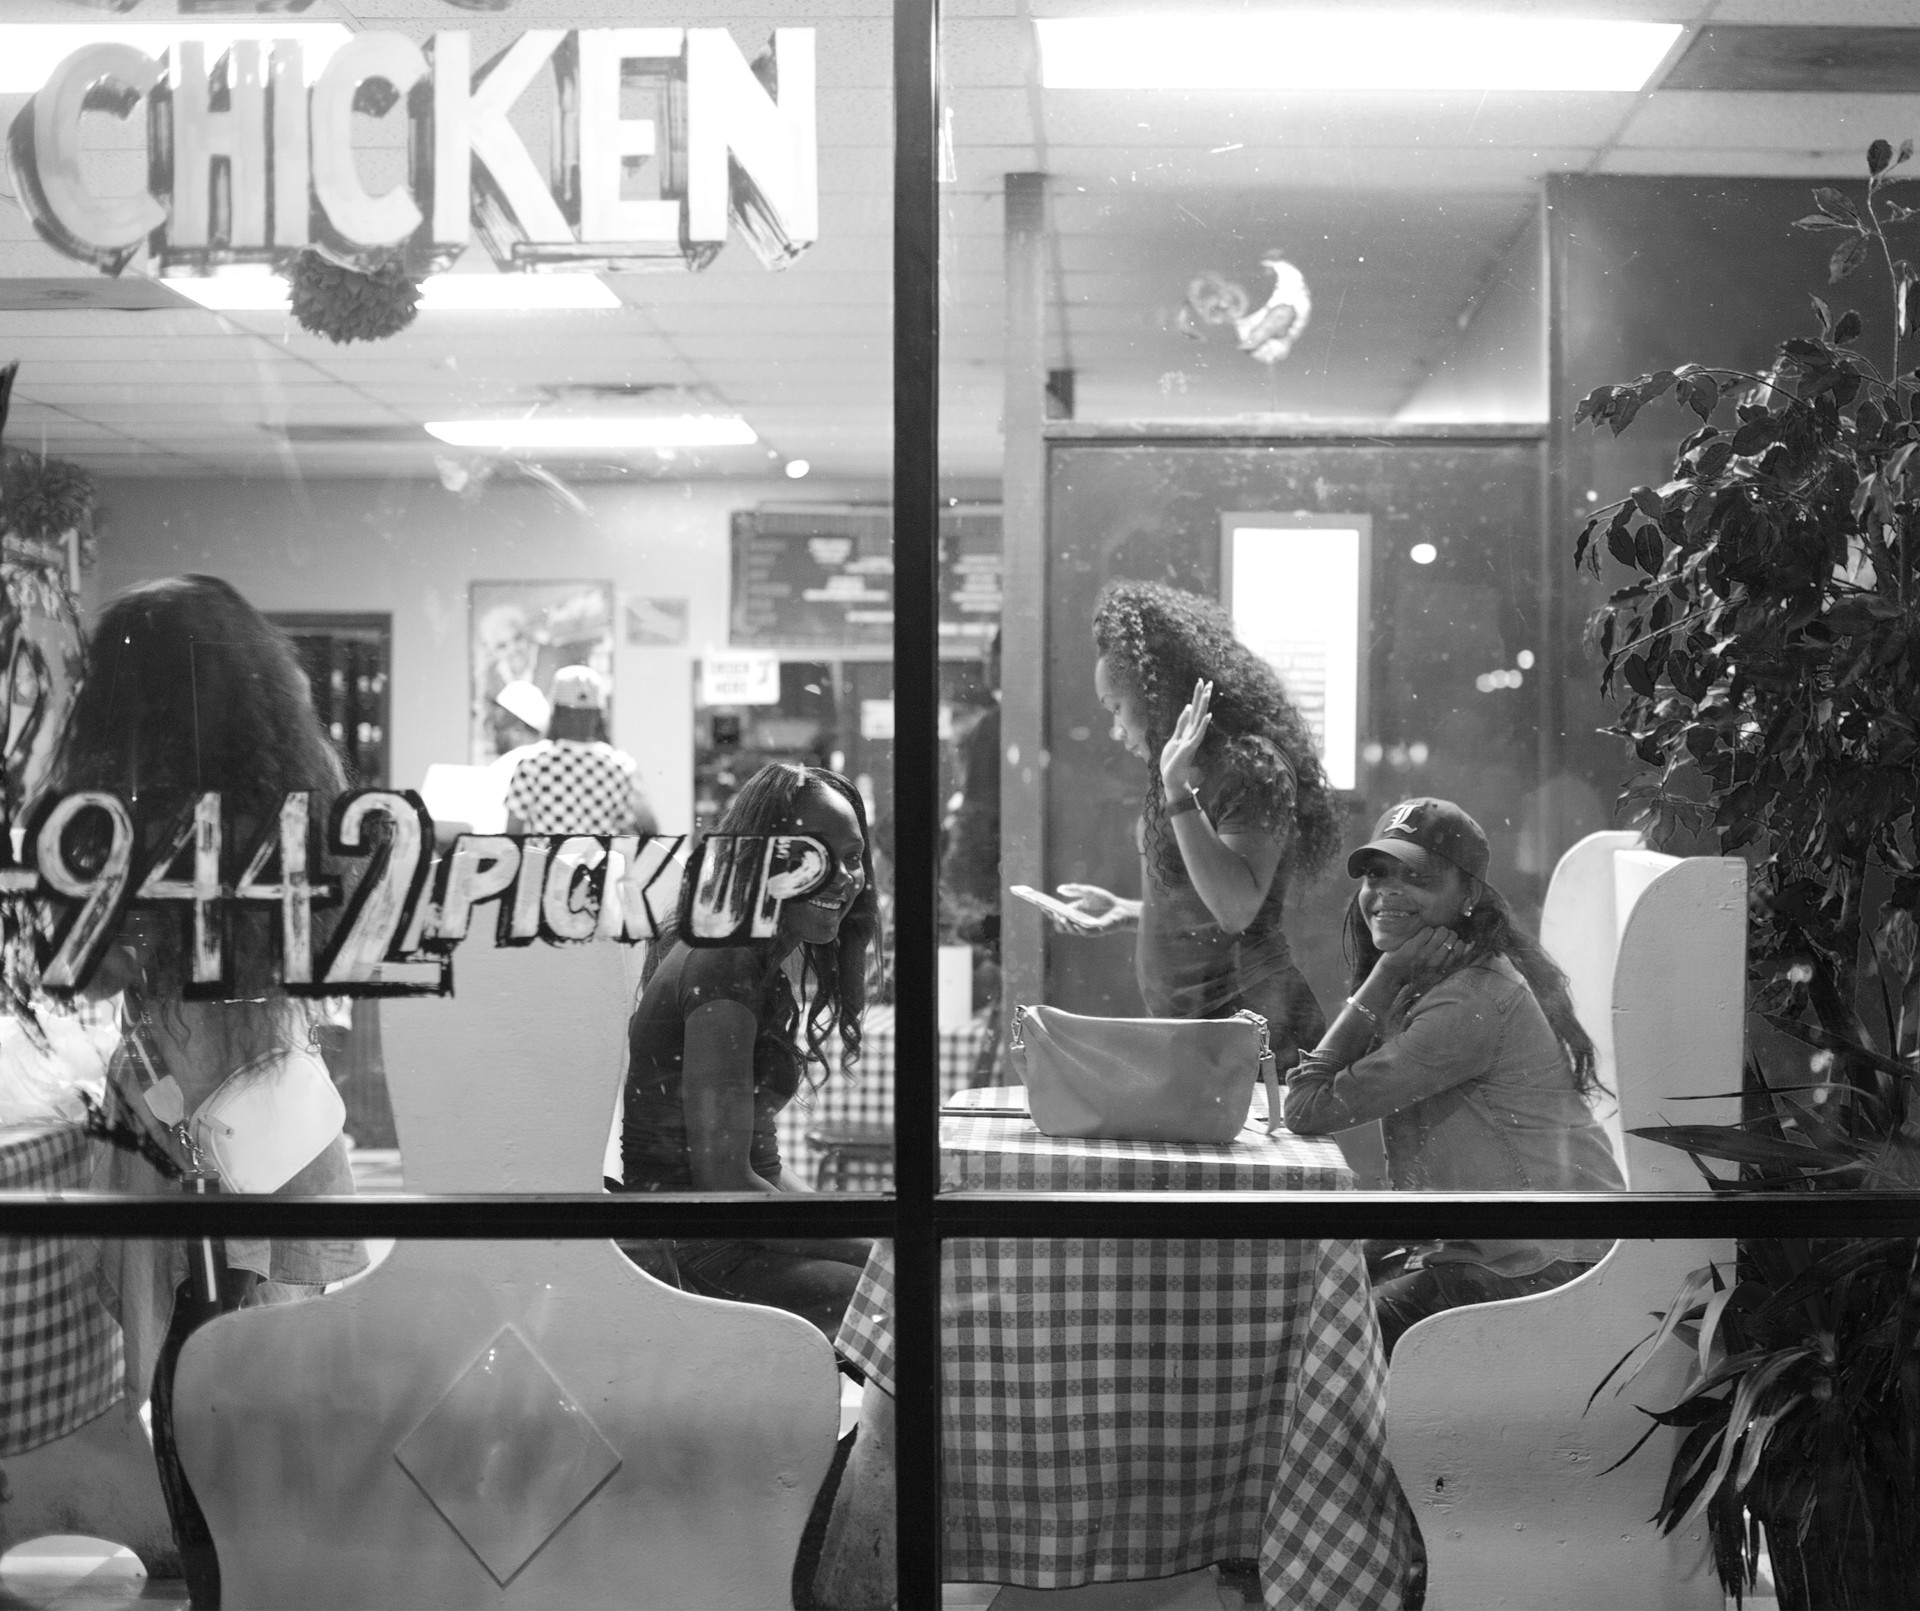 Prince's Hot Chicken Shack by Philip Holsinger